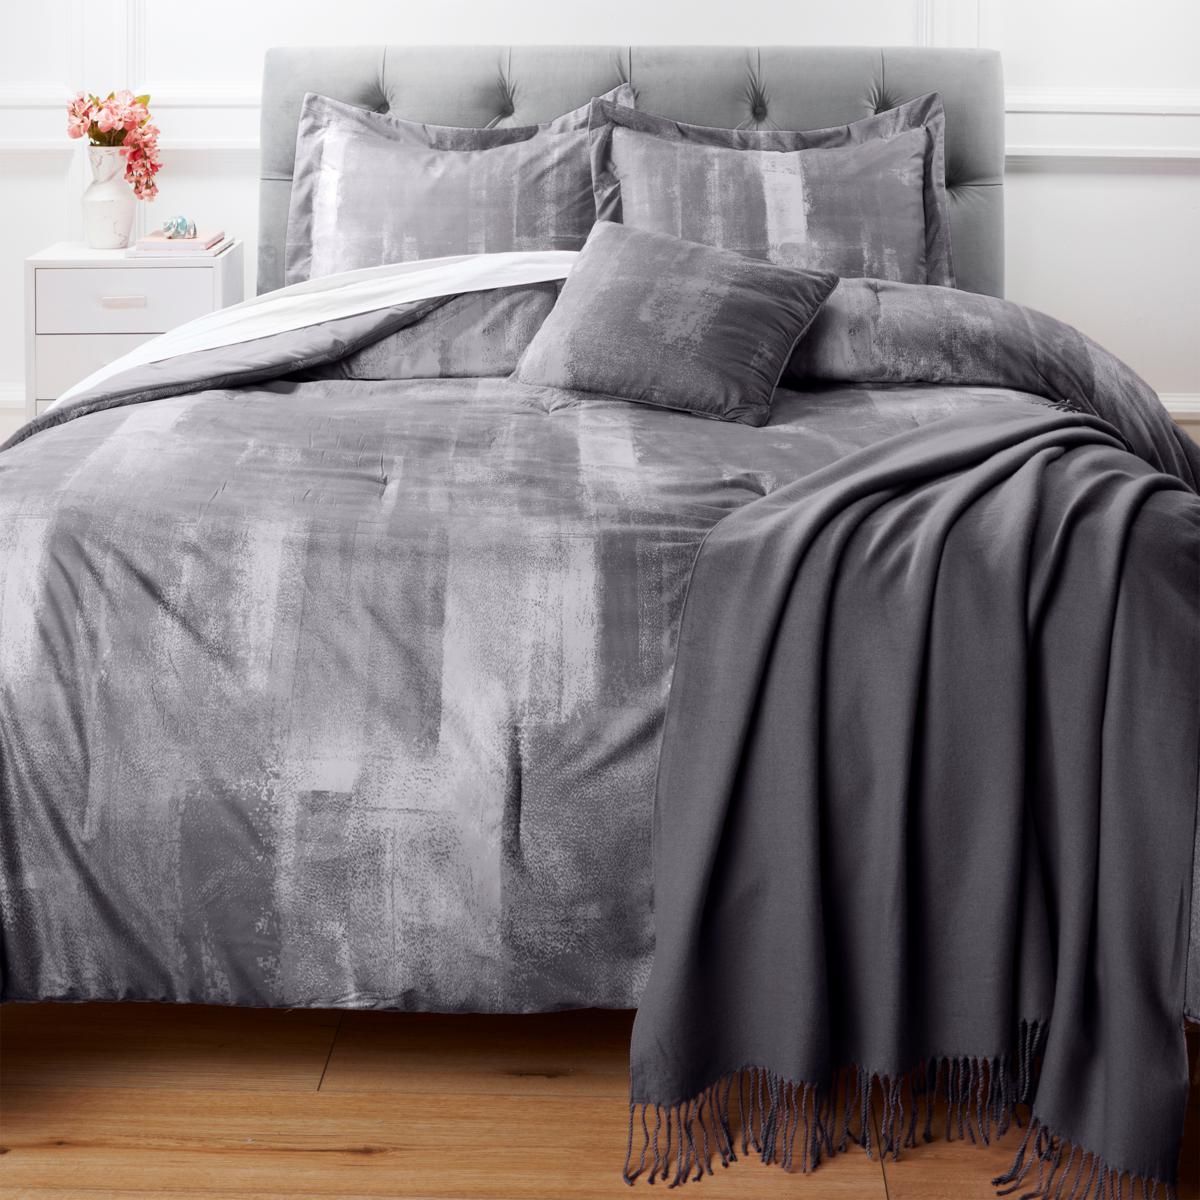 South Street Loft Bedding Set with Pillow and Faux Cashmere Throw - 20409714 | HSN | HSN